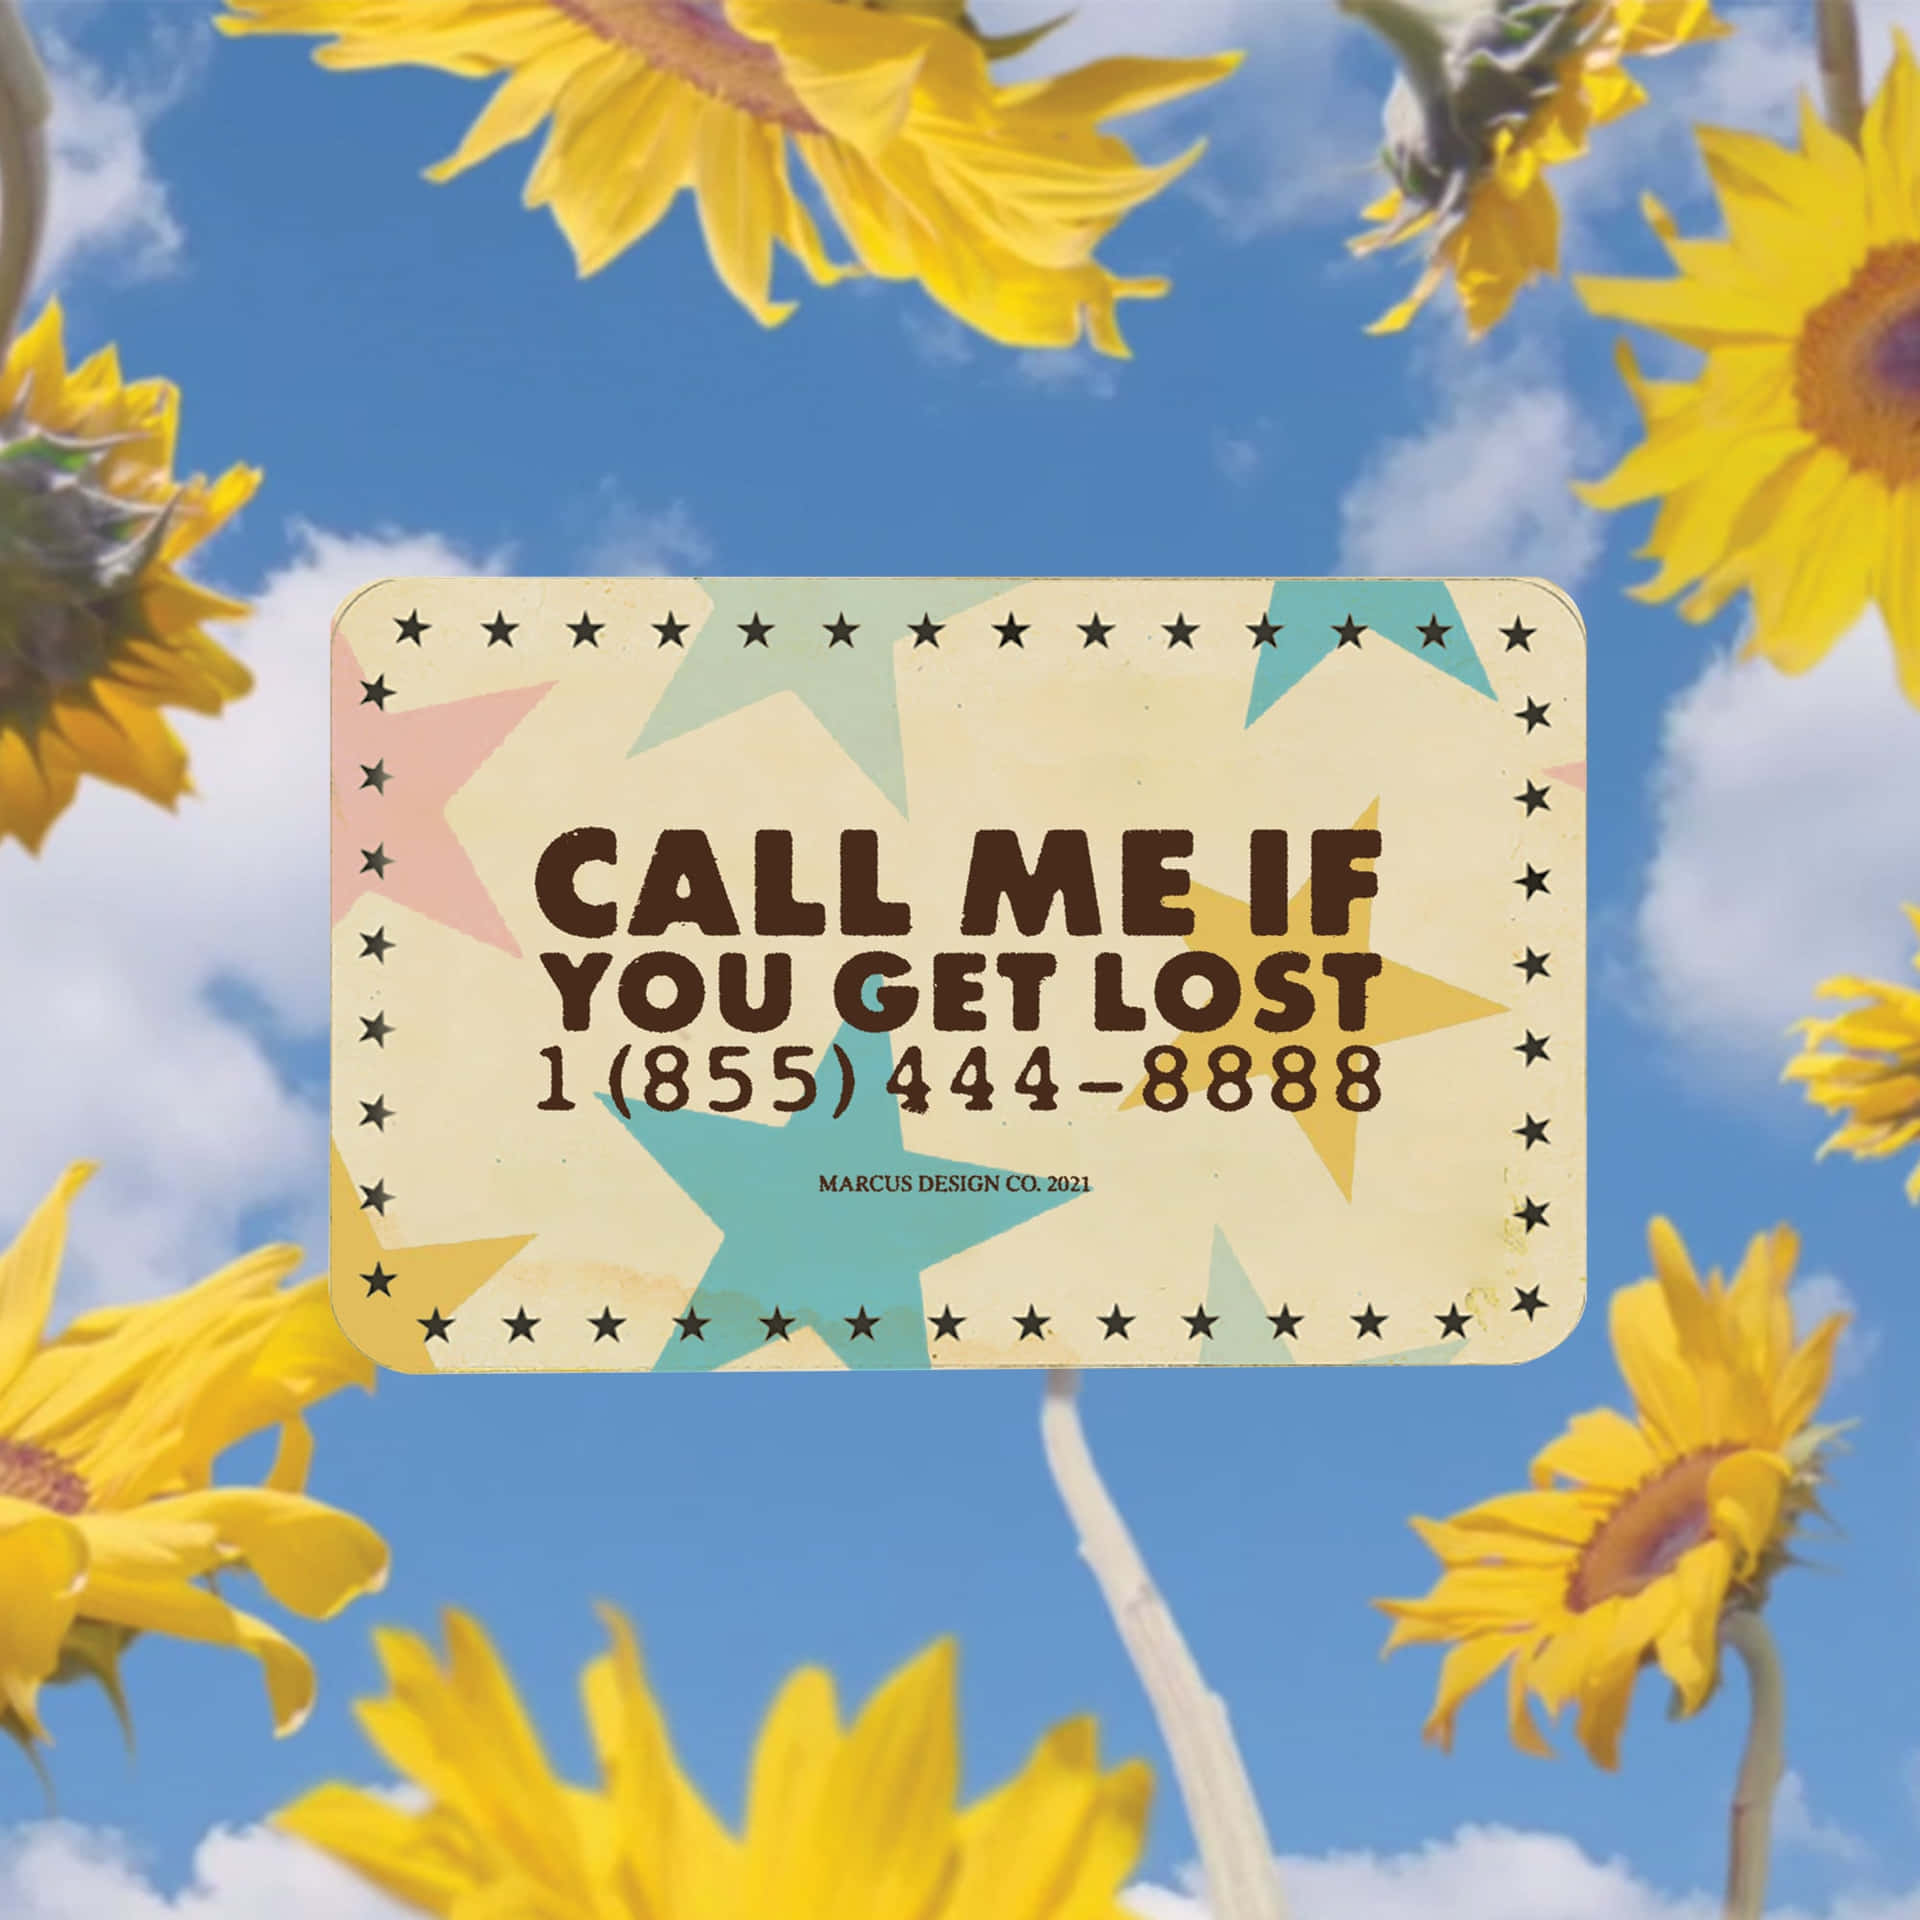 Download Call Me If You Get Lost Wallpaper